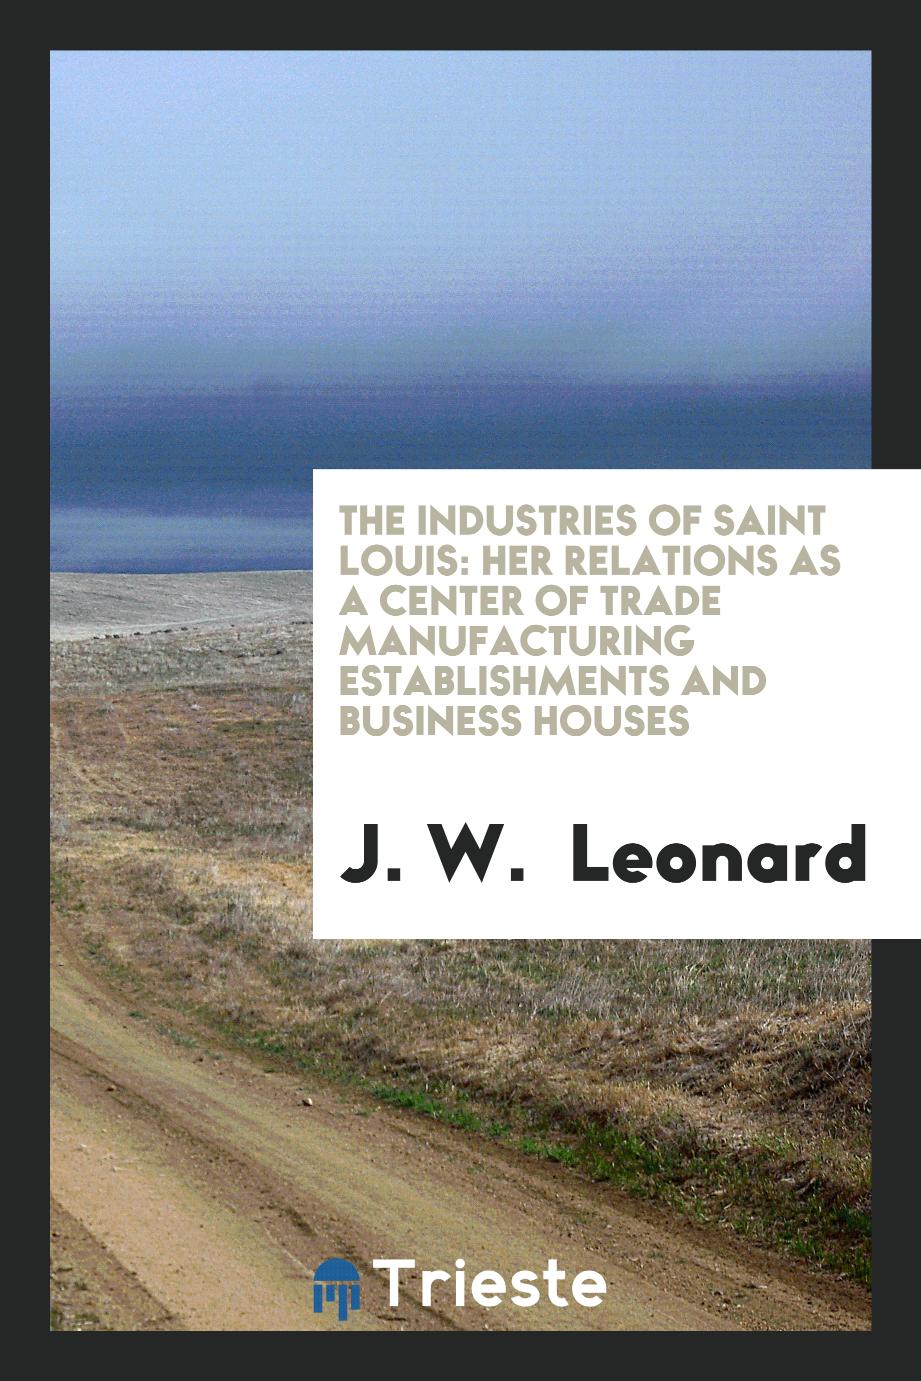 The Industries of Saint Louis: Her Relations as a Center of Trade Manufacturing Establishments and Business Houses